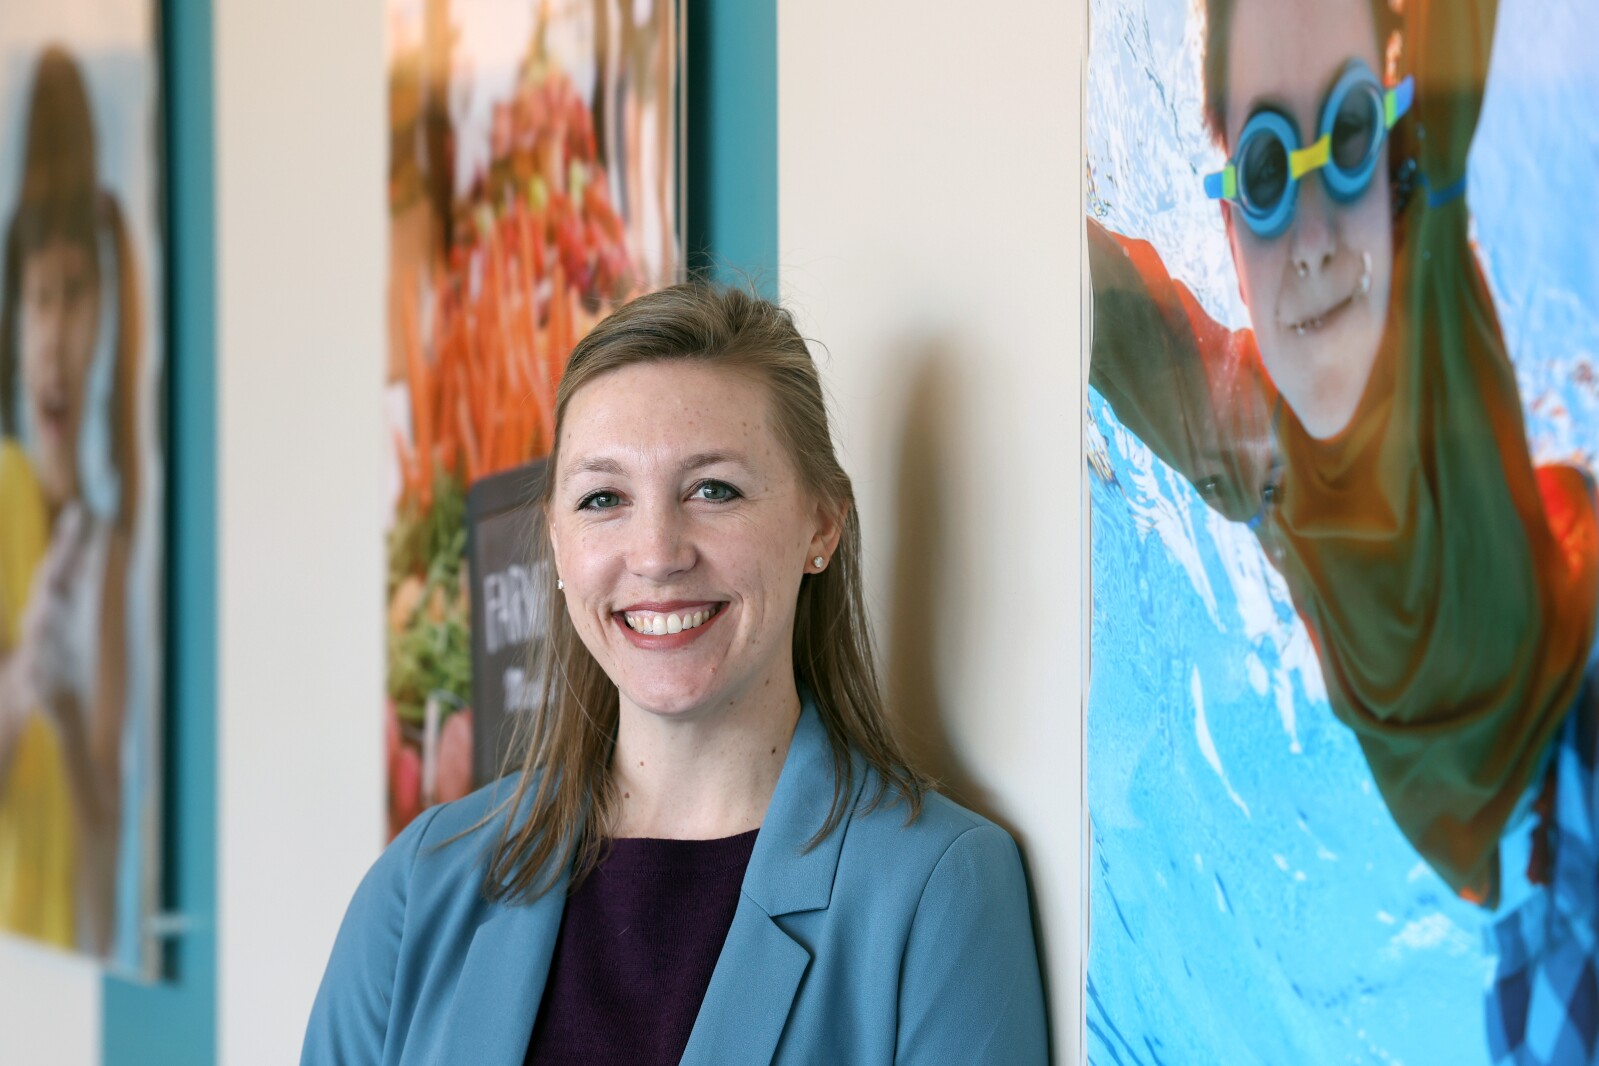 New Grand Forks Director of Public Health Tess Moeller applauds continued efforts in department - Grand Forks Herald